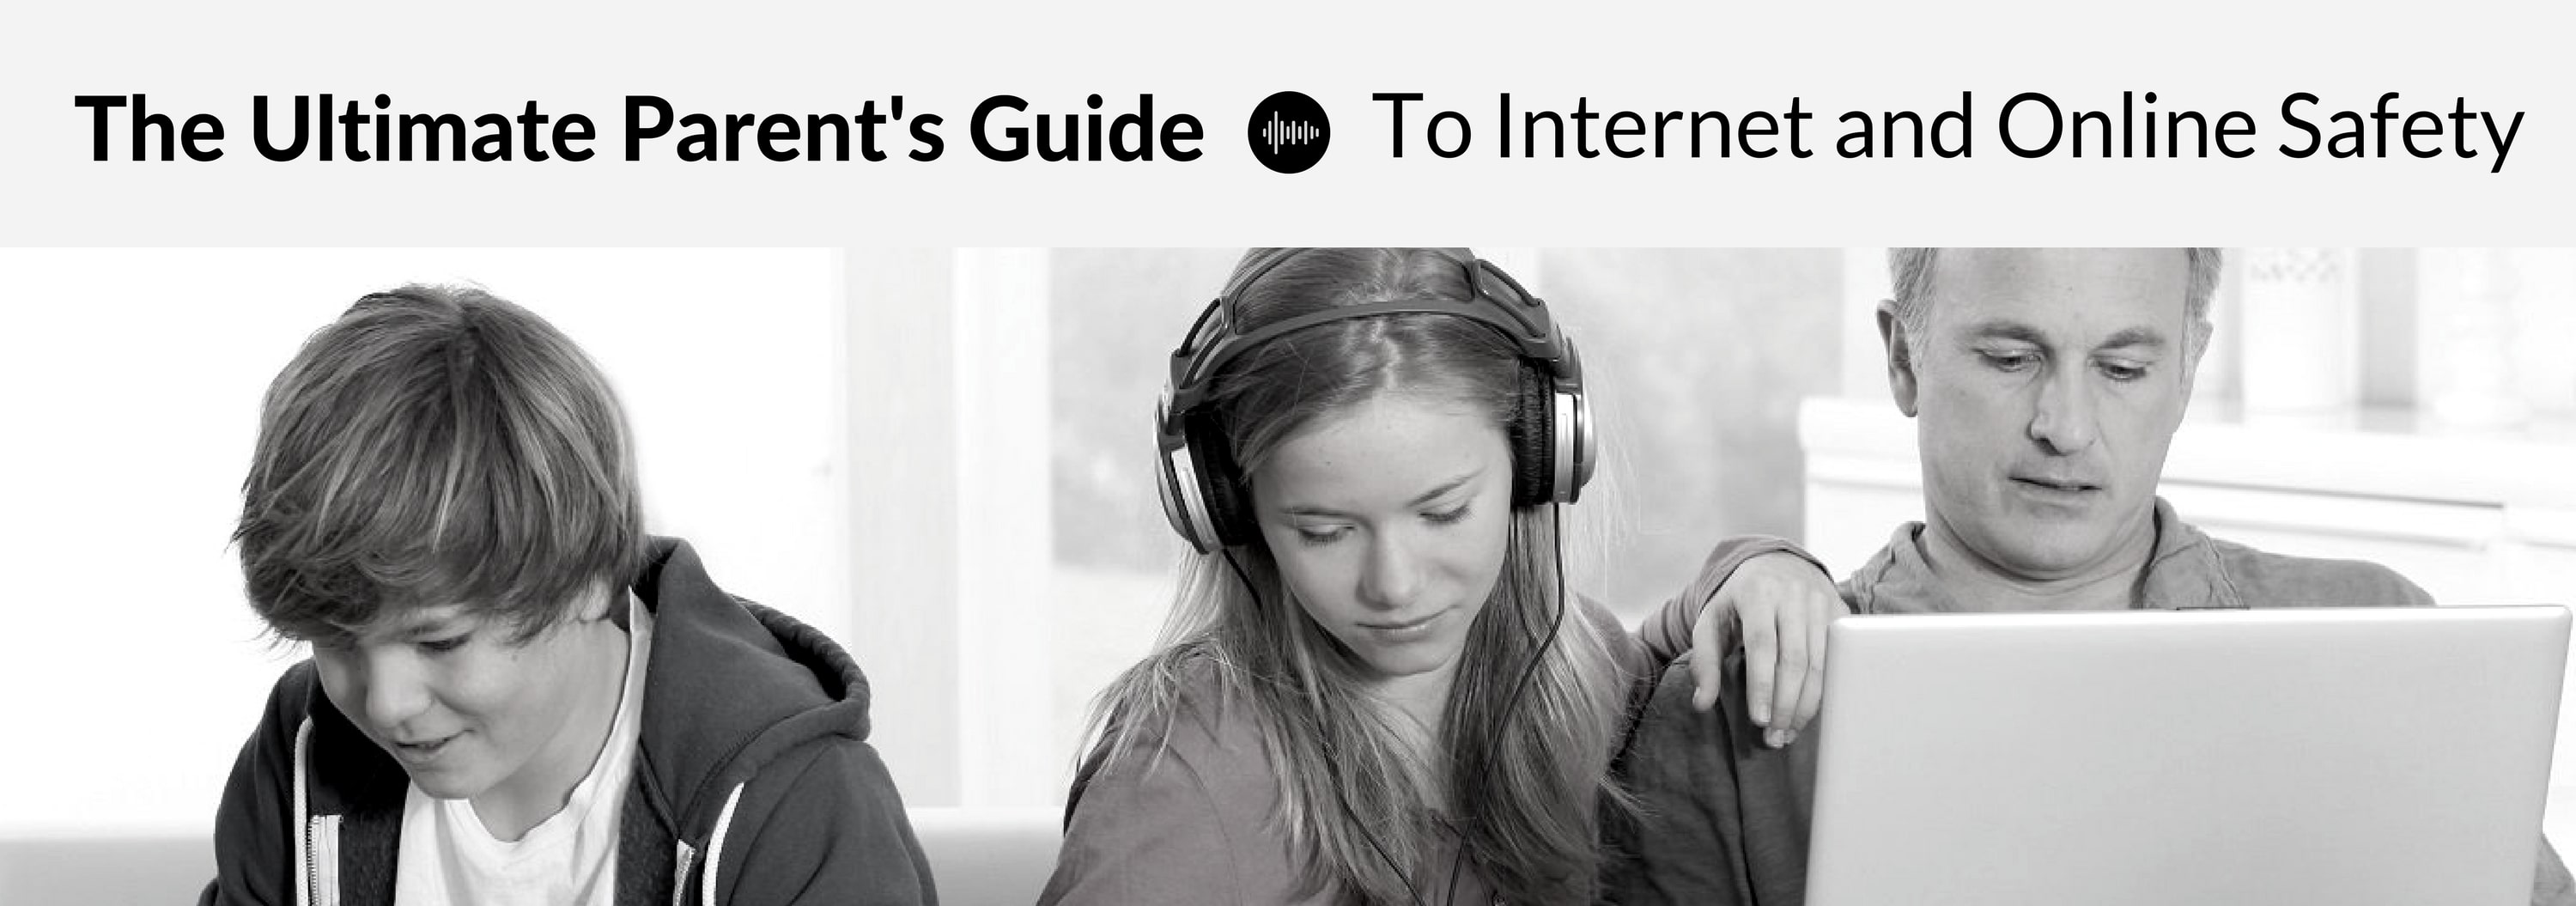 The Ultimate Parent's Guide To Internet and Online Safety